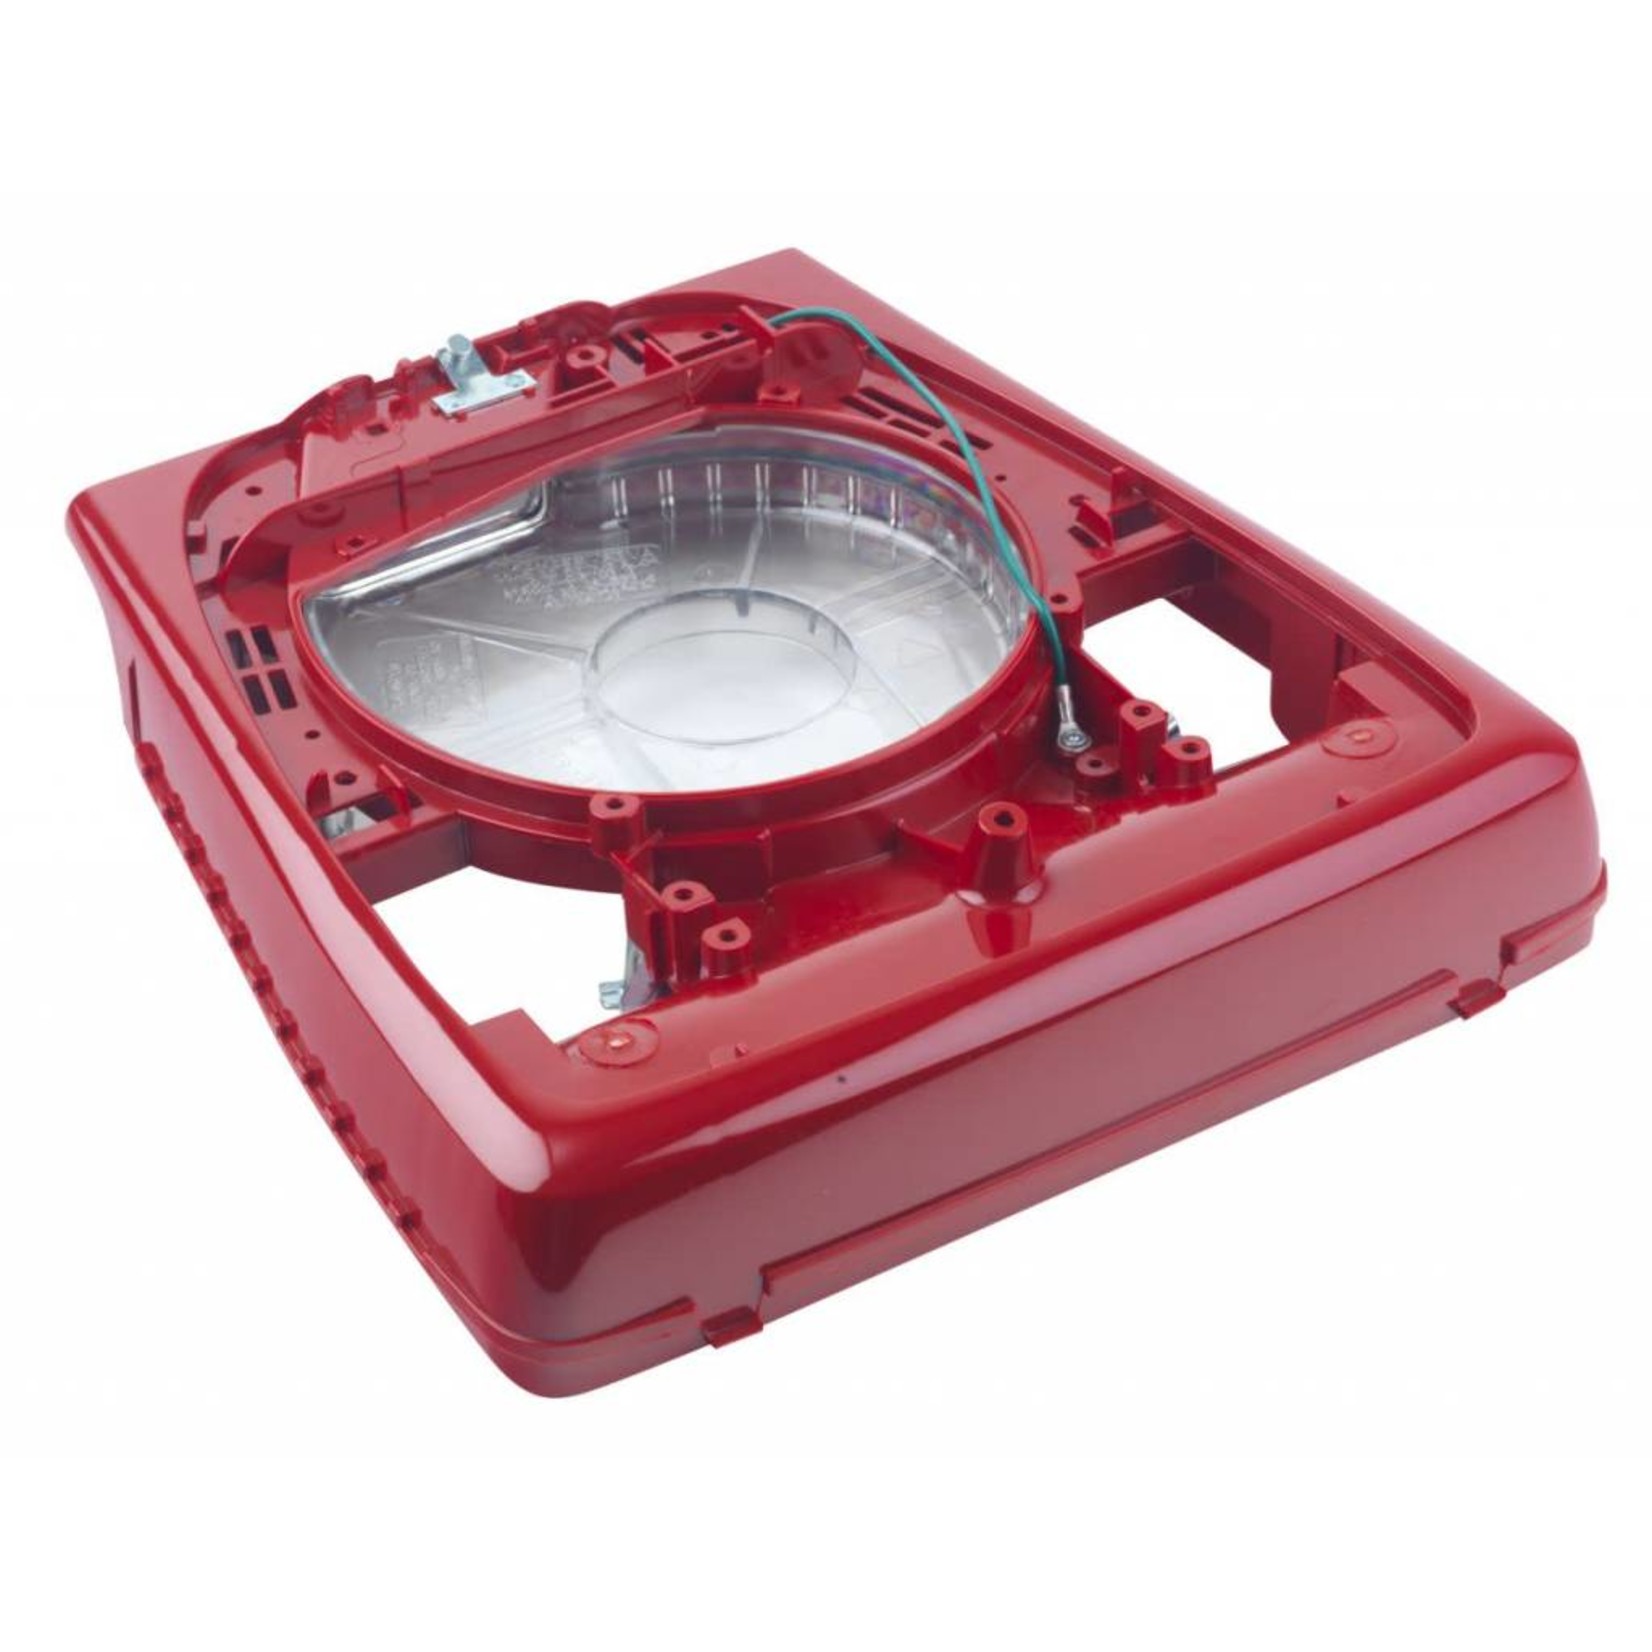 Sanitaire Sanitaire Red Commercial Base w/ Clear Fan Chamber